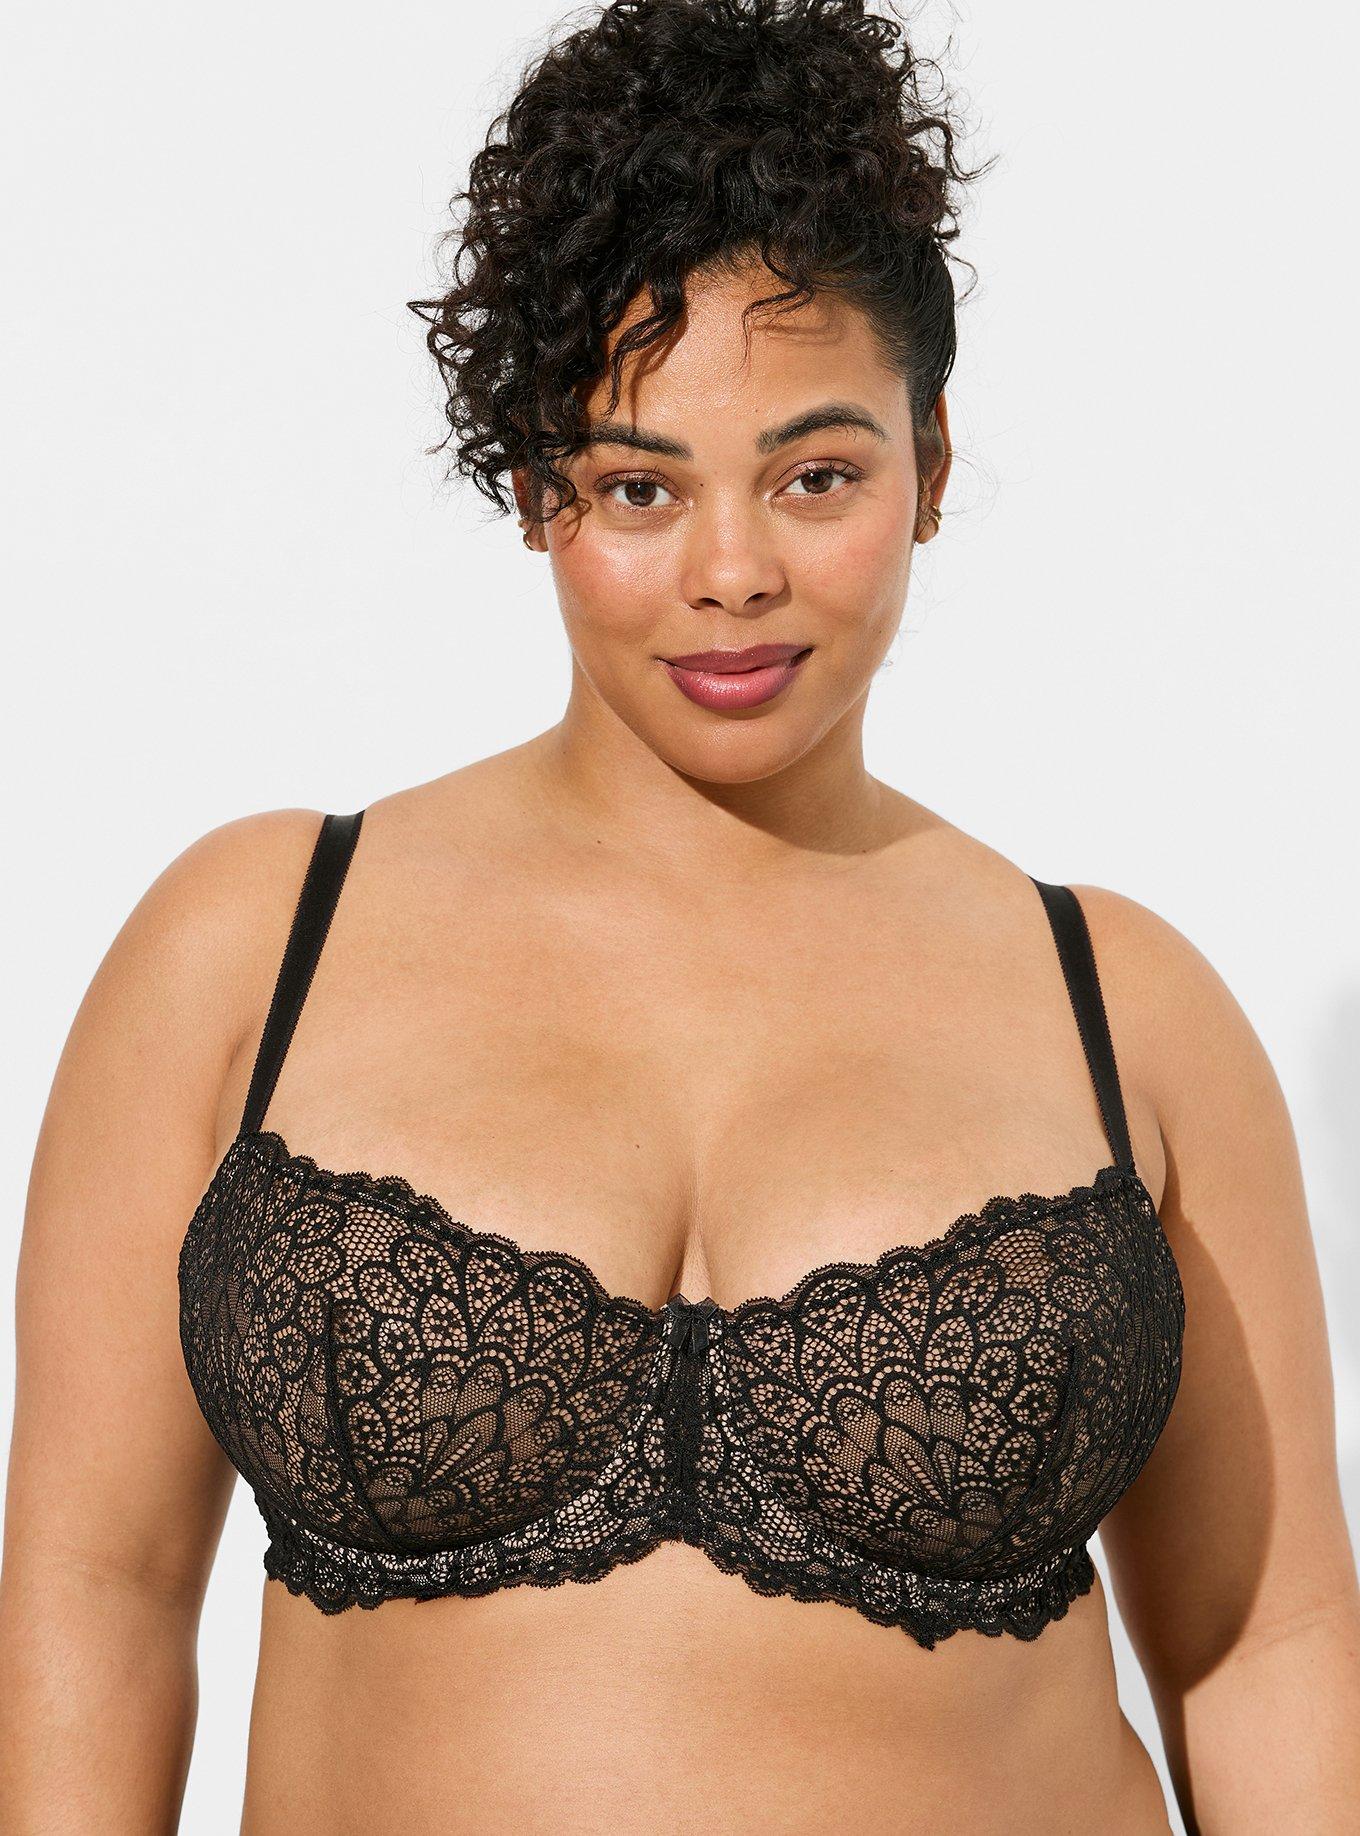 The Va-Voom Bullet Bra Sew-Along- Day 1 Pattern Download and